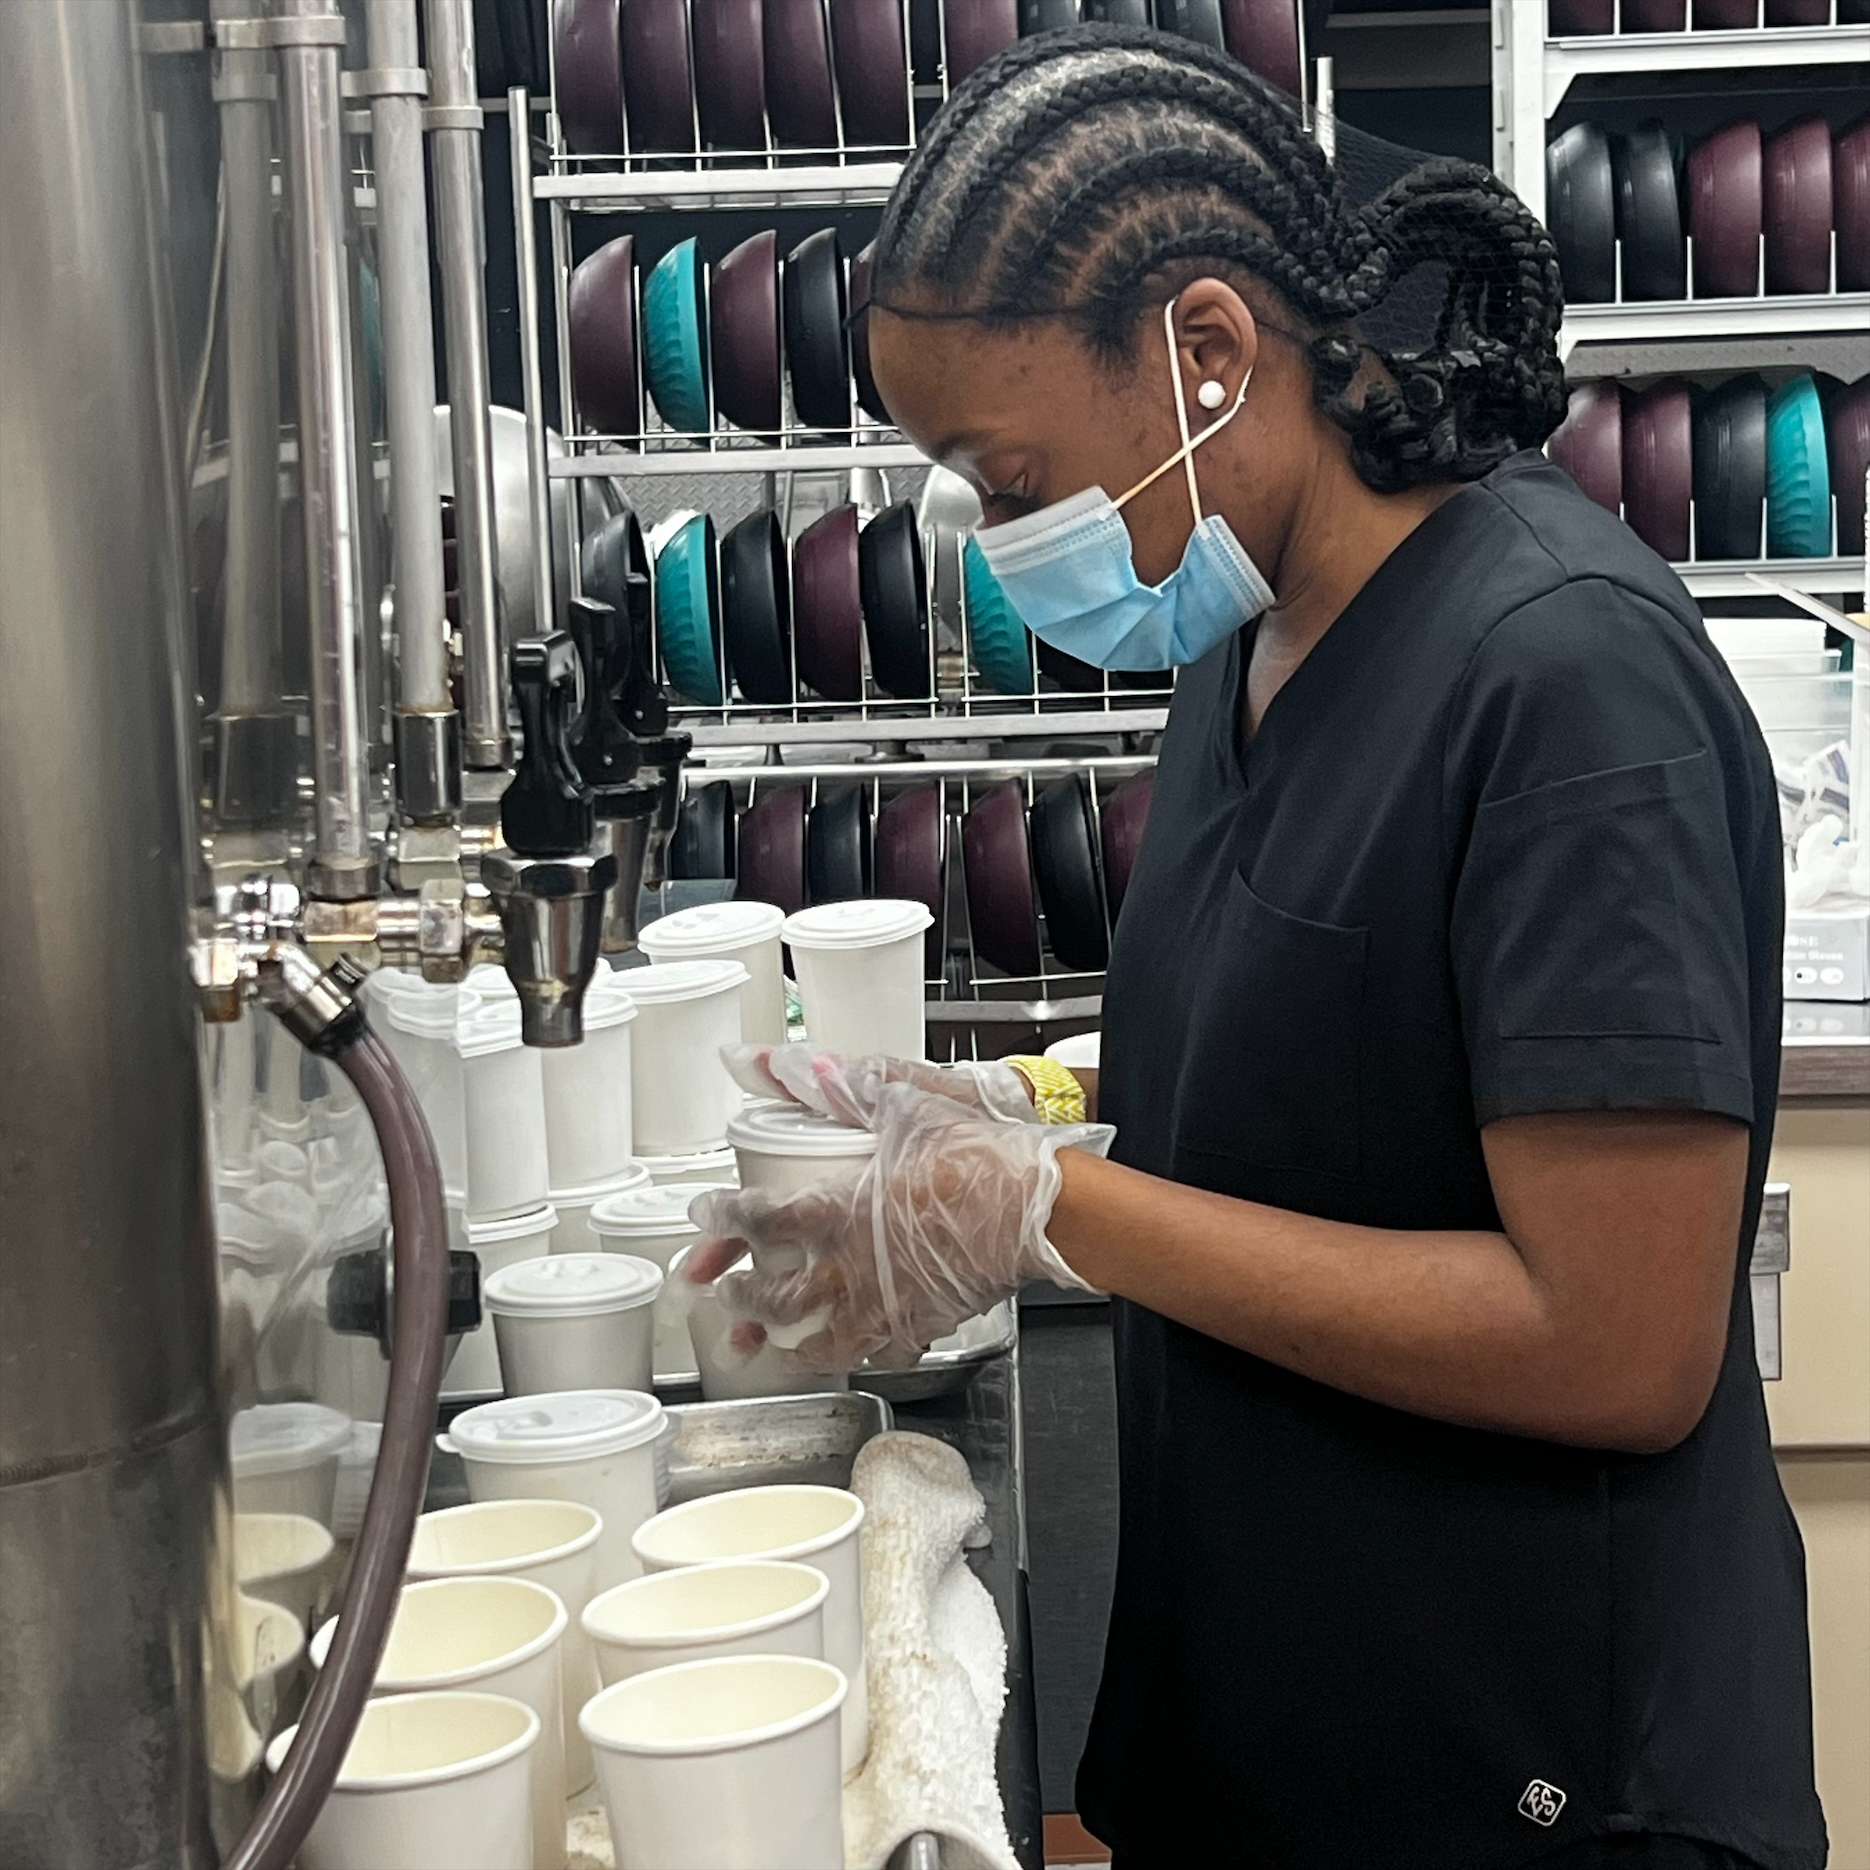 A worker in a black uniform and protective gloves fills cups with a soft serve machine at an ice cream shop, shelves with colorful ice cream containers in the background.